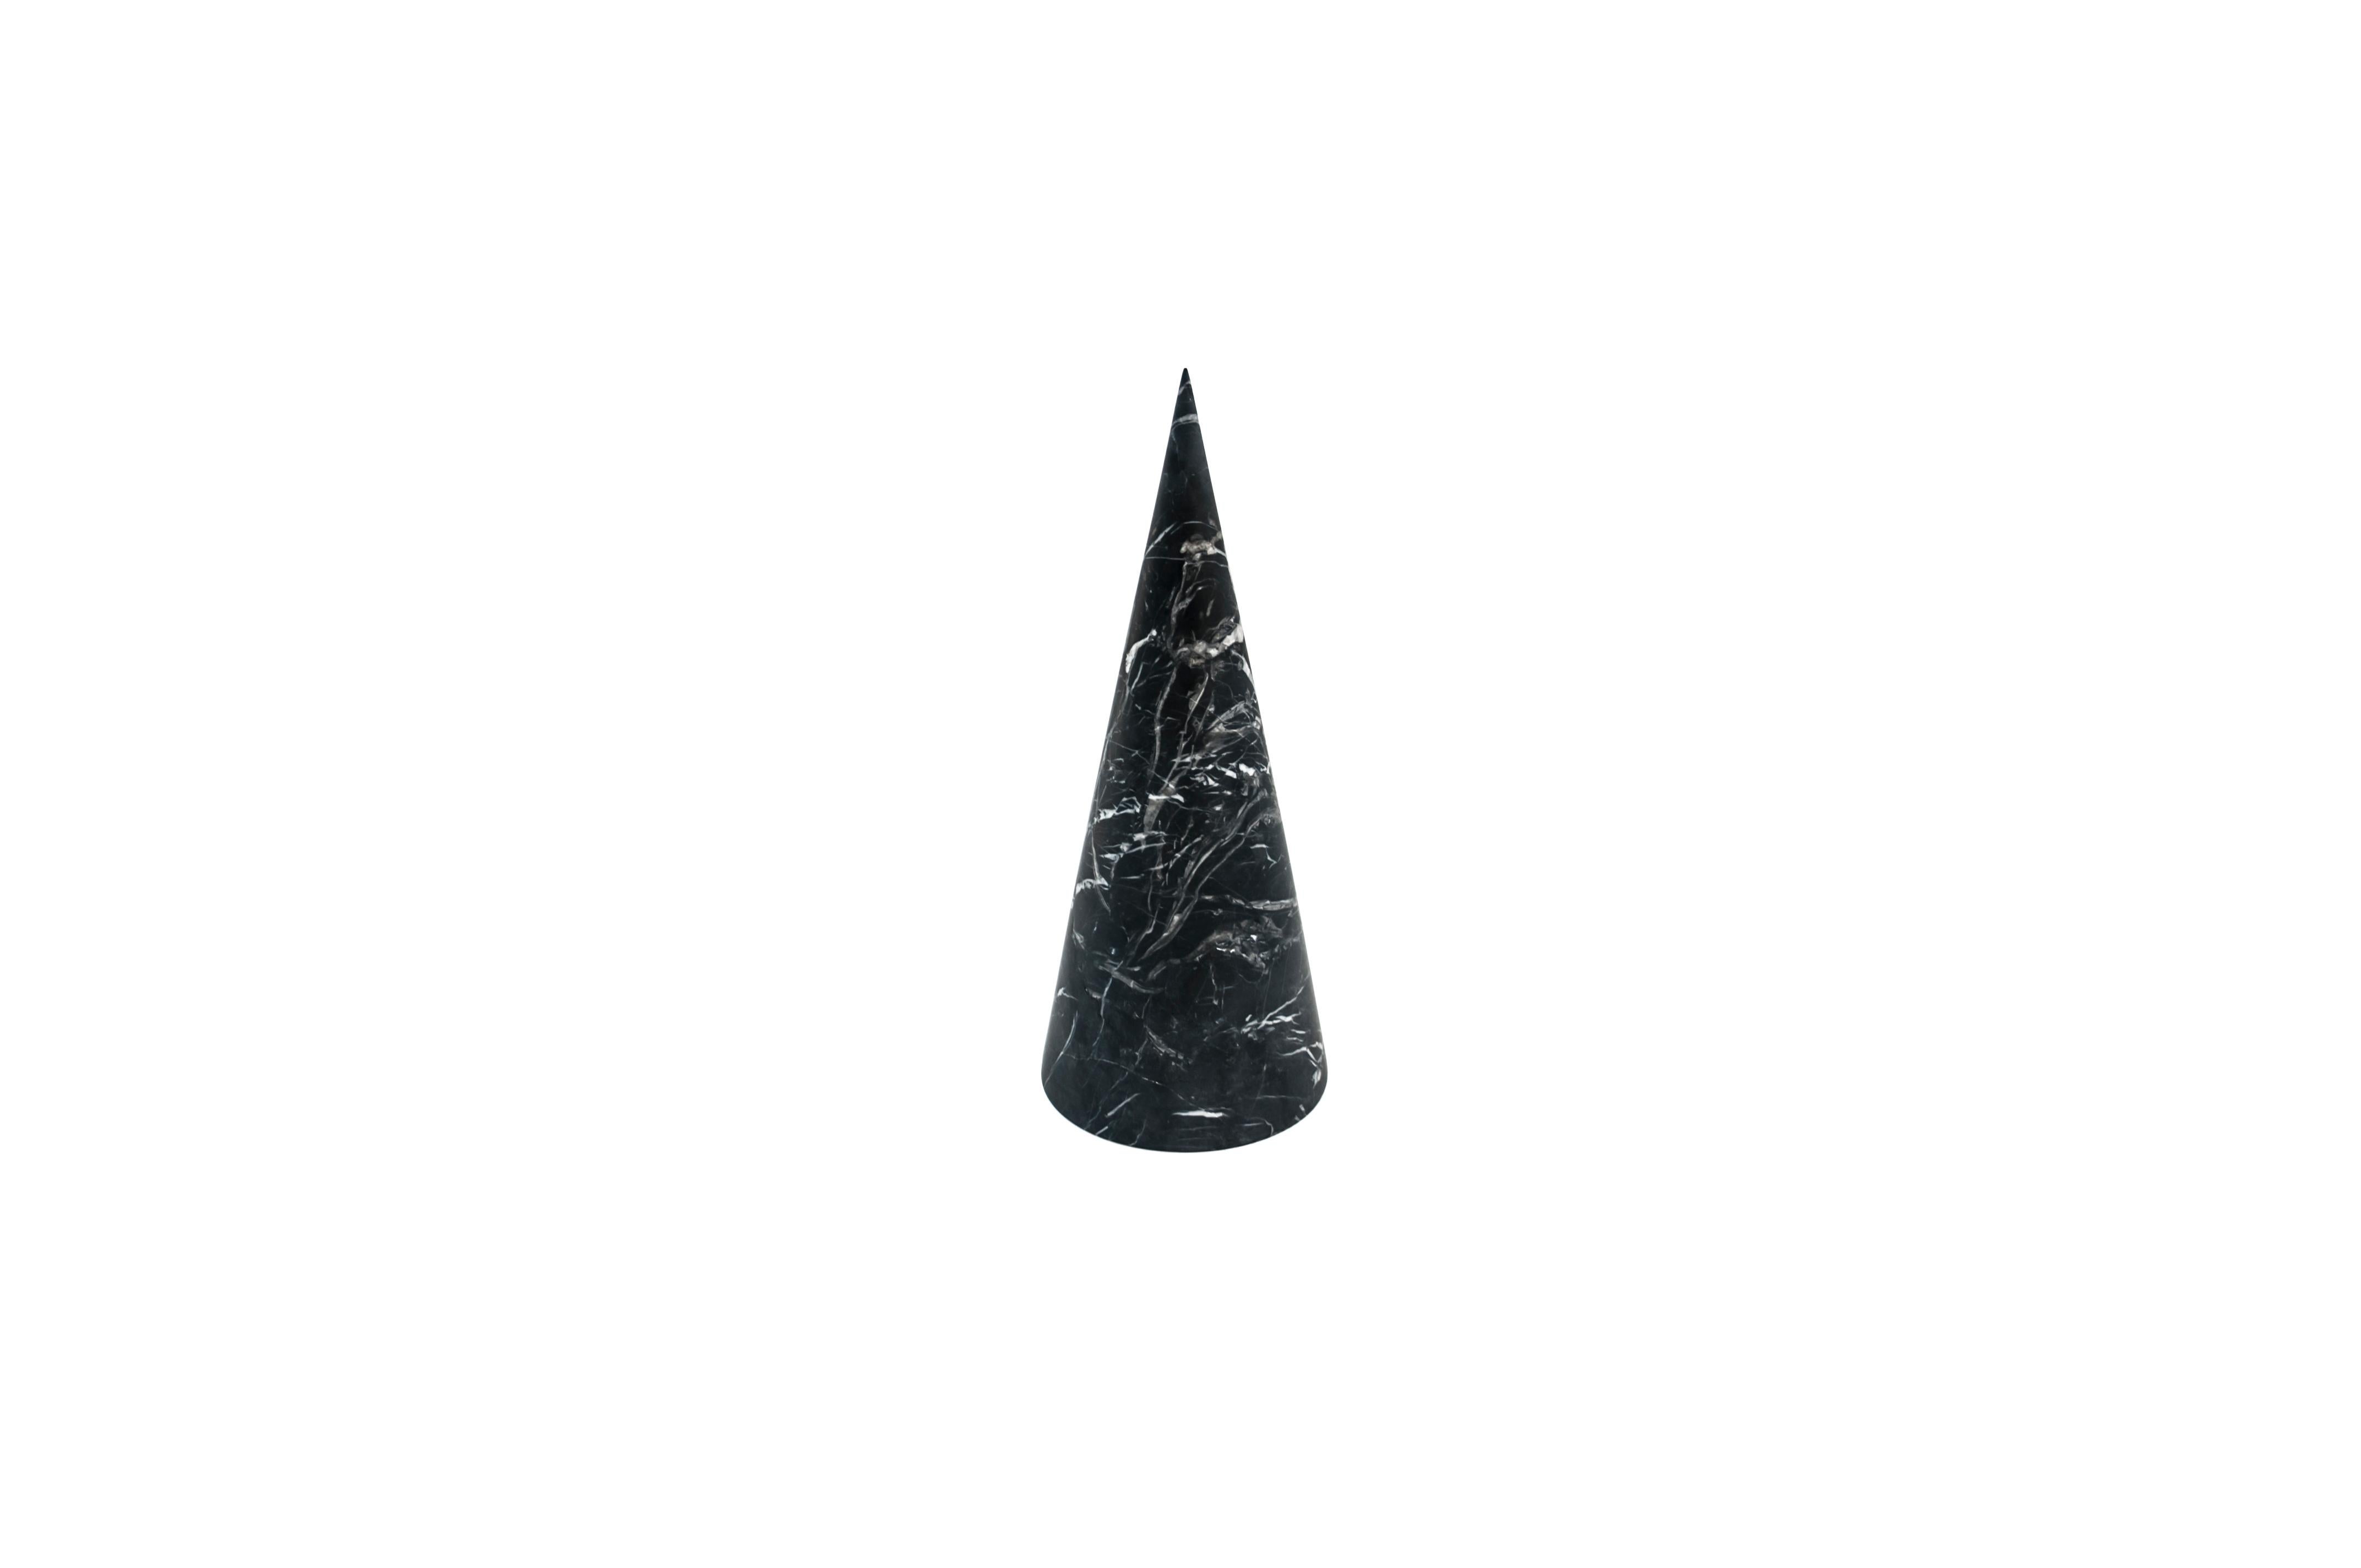 Hand-Crafted Handmade Big Decorative Paperweight Cone in Satin Black Marquina Marble For Sale